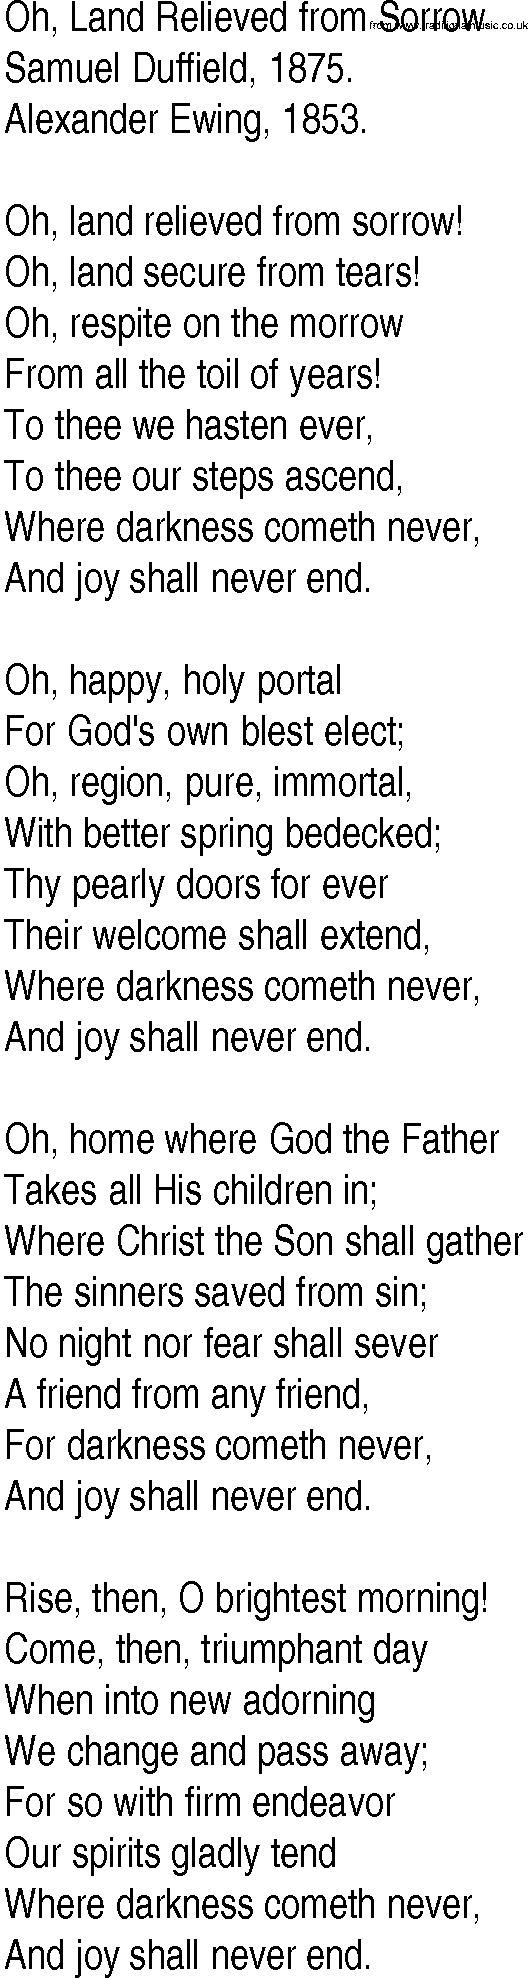 Hymn and Gospel Song: Oh, Land Relieved from Sorrow by Samuel Duffield lyrics